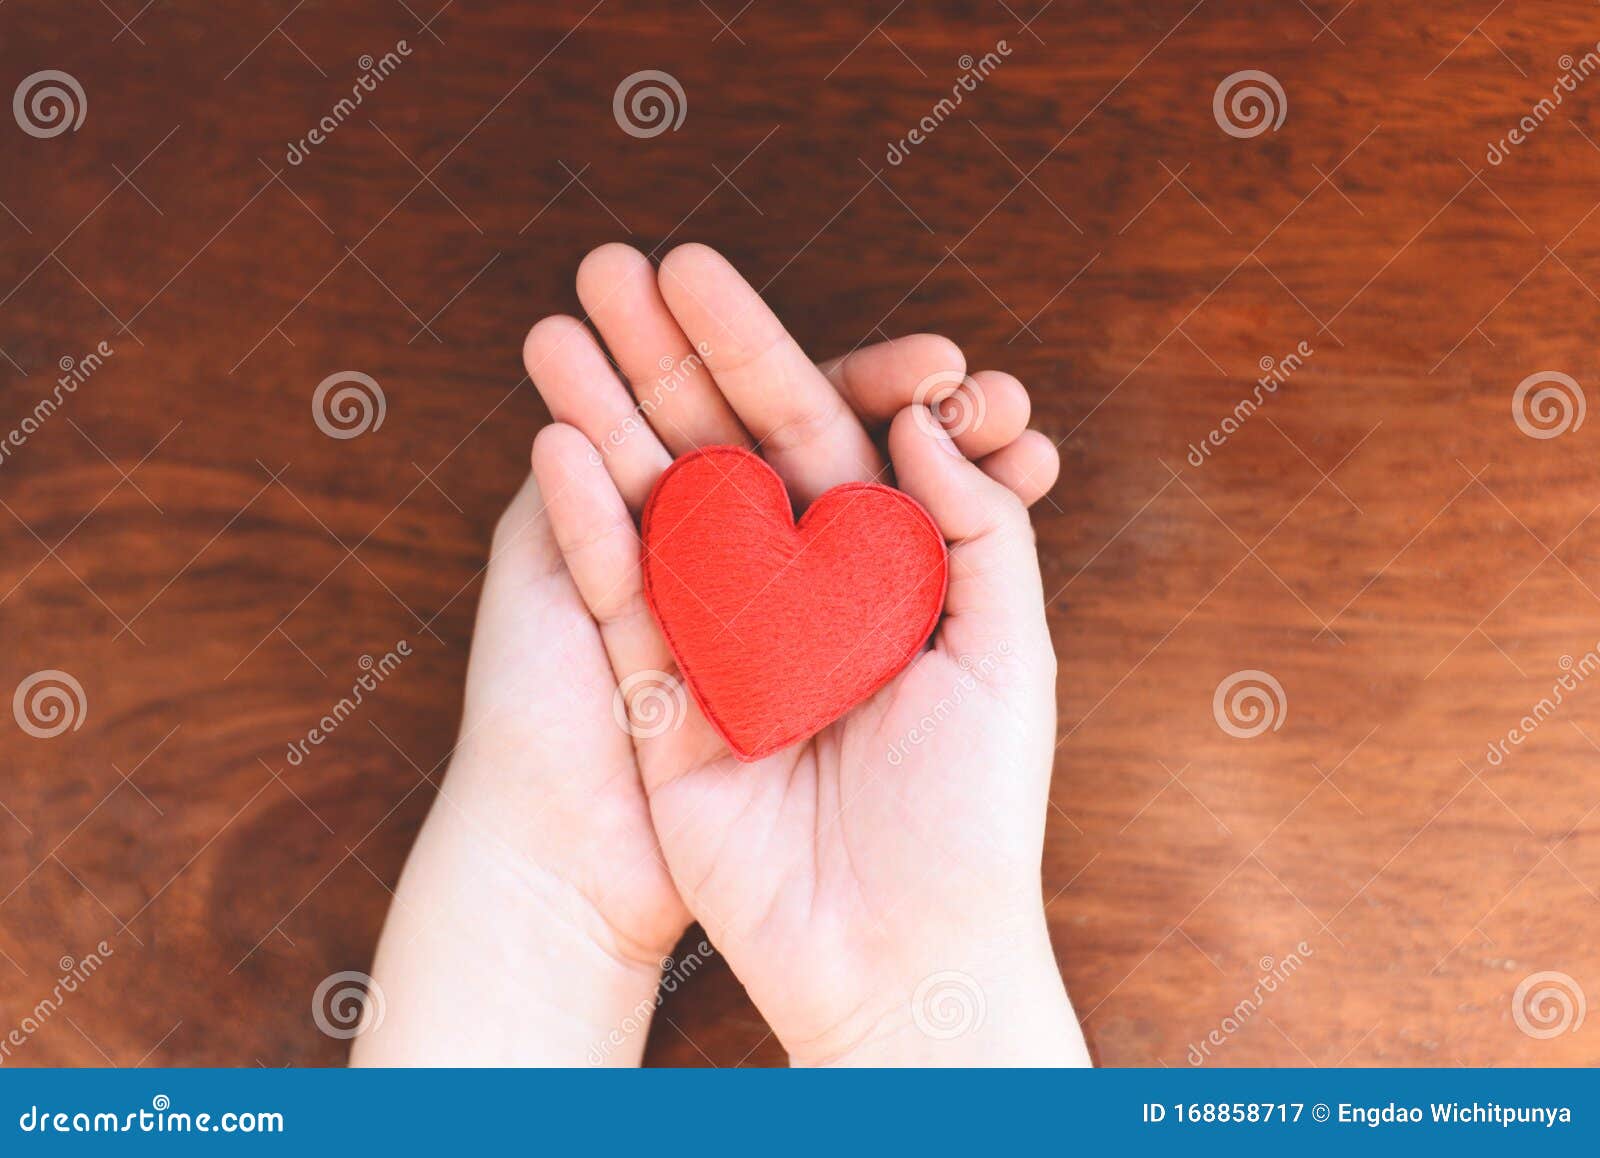 heart in hand for philanthropy concept - woman holding red heart on hands for valentines day or donate help give love warmth take